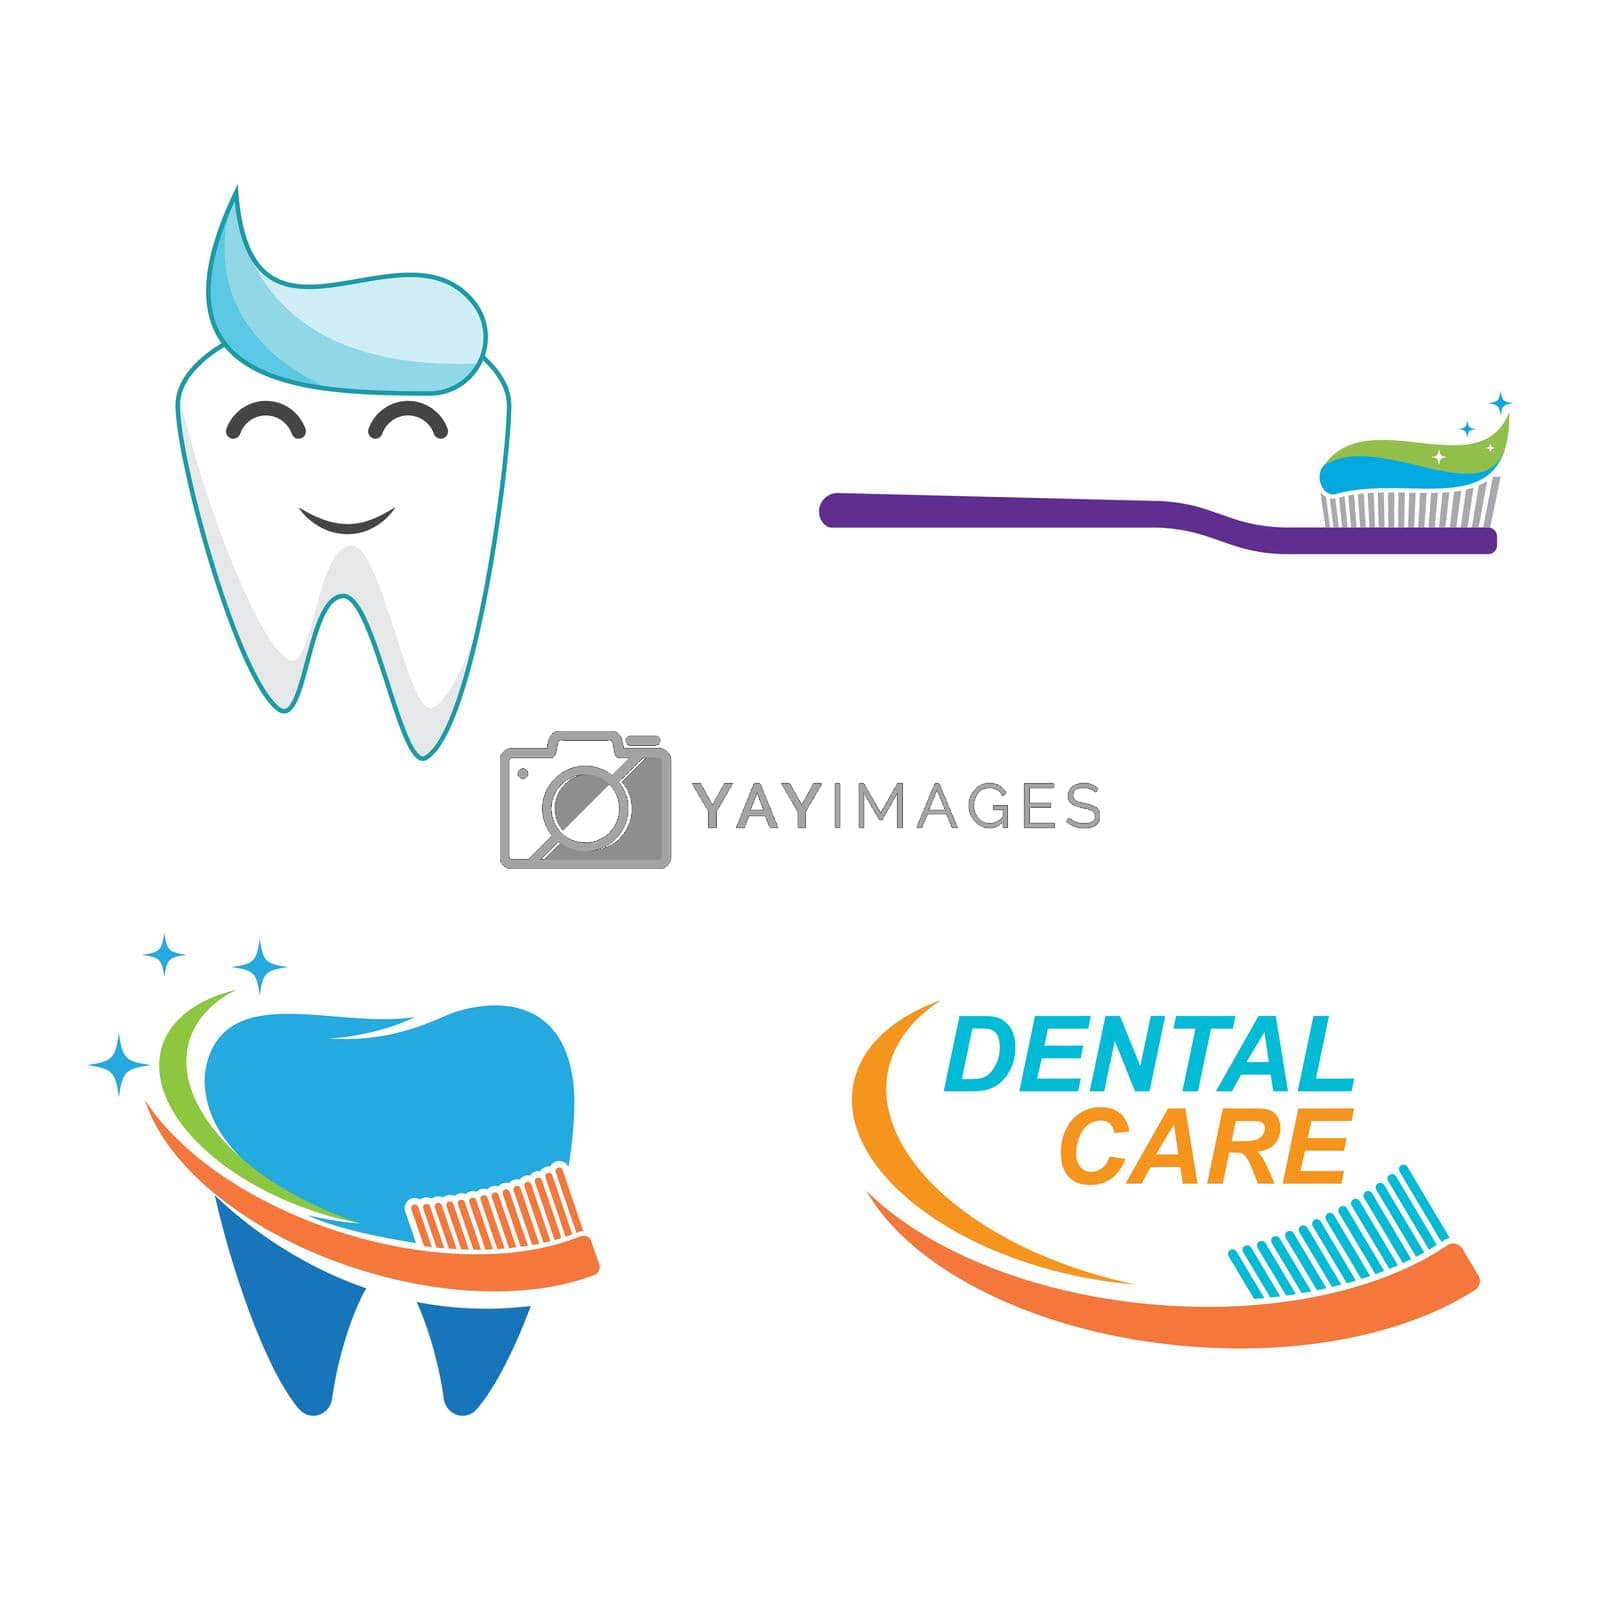 Royalty free image of Toothbrush logo illustration by awk